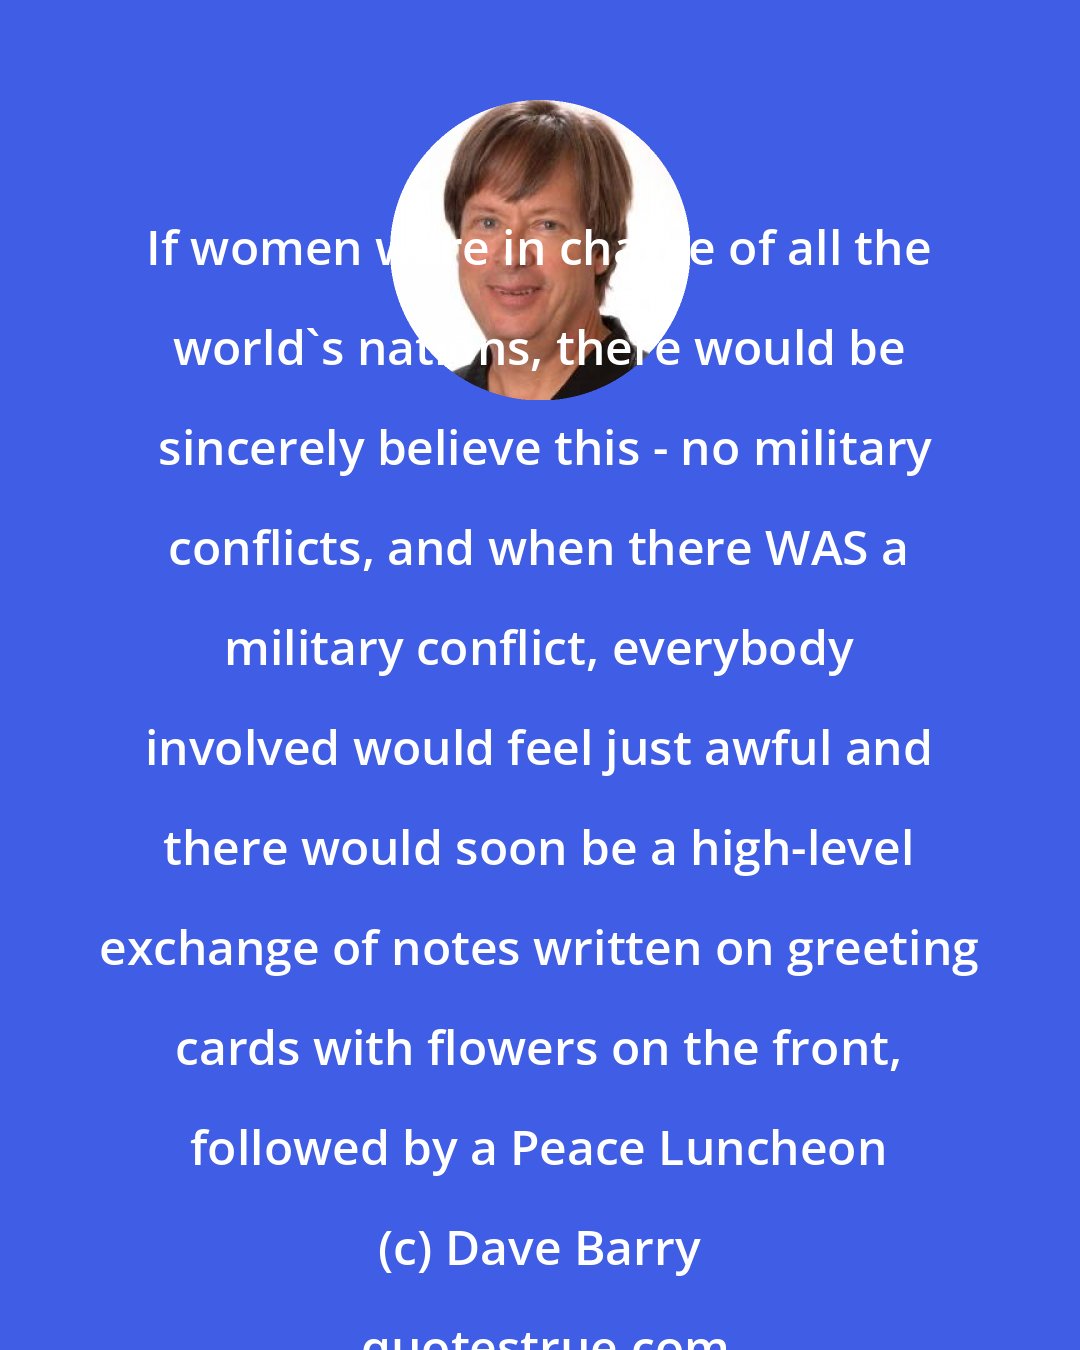 Dave Barry: If women were in charge of all the world's nations, there would be  sincerely believe this - no military conflicts, and when there WAS a military conflict, everybody involved would feel just awful and there would soon be a high-level exchange of notes written on greeting cards with flowers on the front, followed by a Peace Luncheon